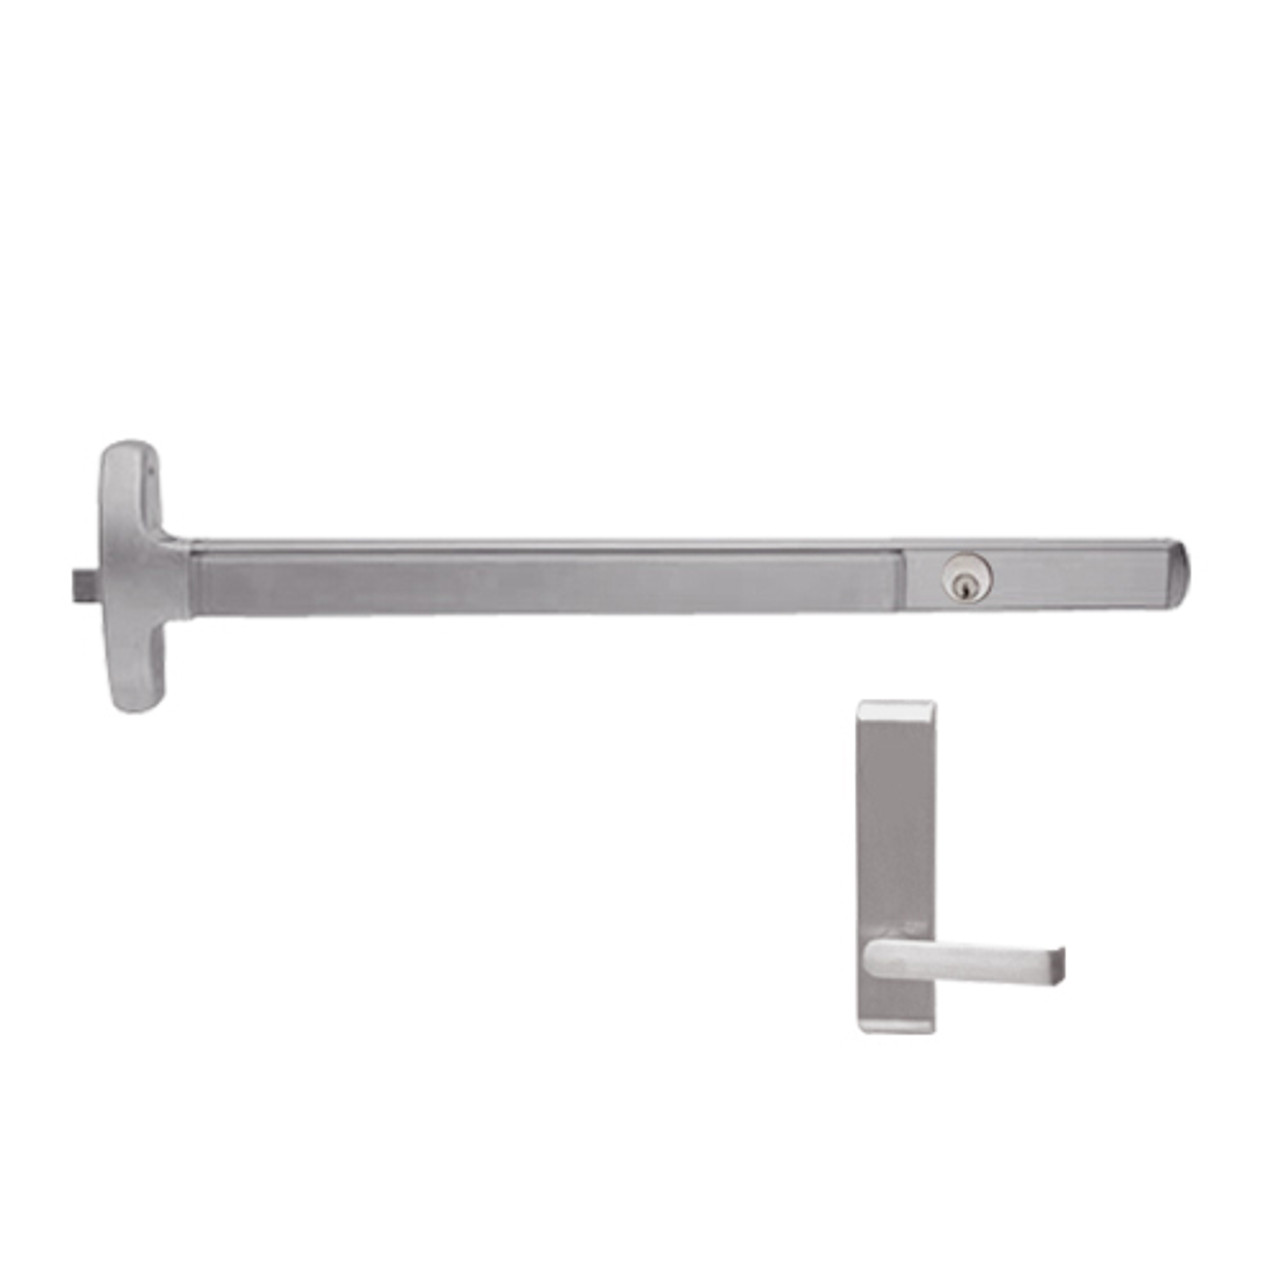 CD24-R-L-DT-DANE-US32D-3-LHR Falcon Exit Device in Satin Stainless Steel